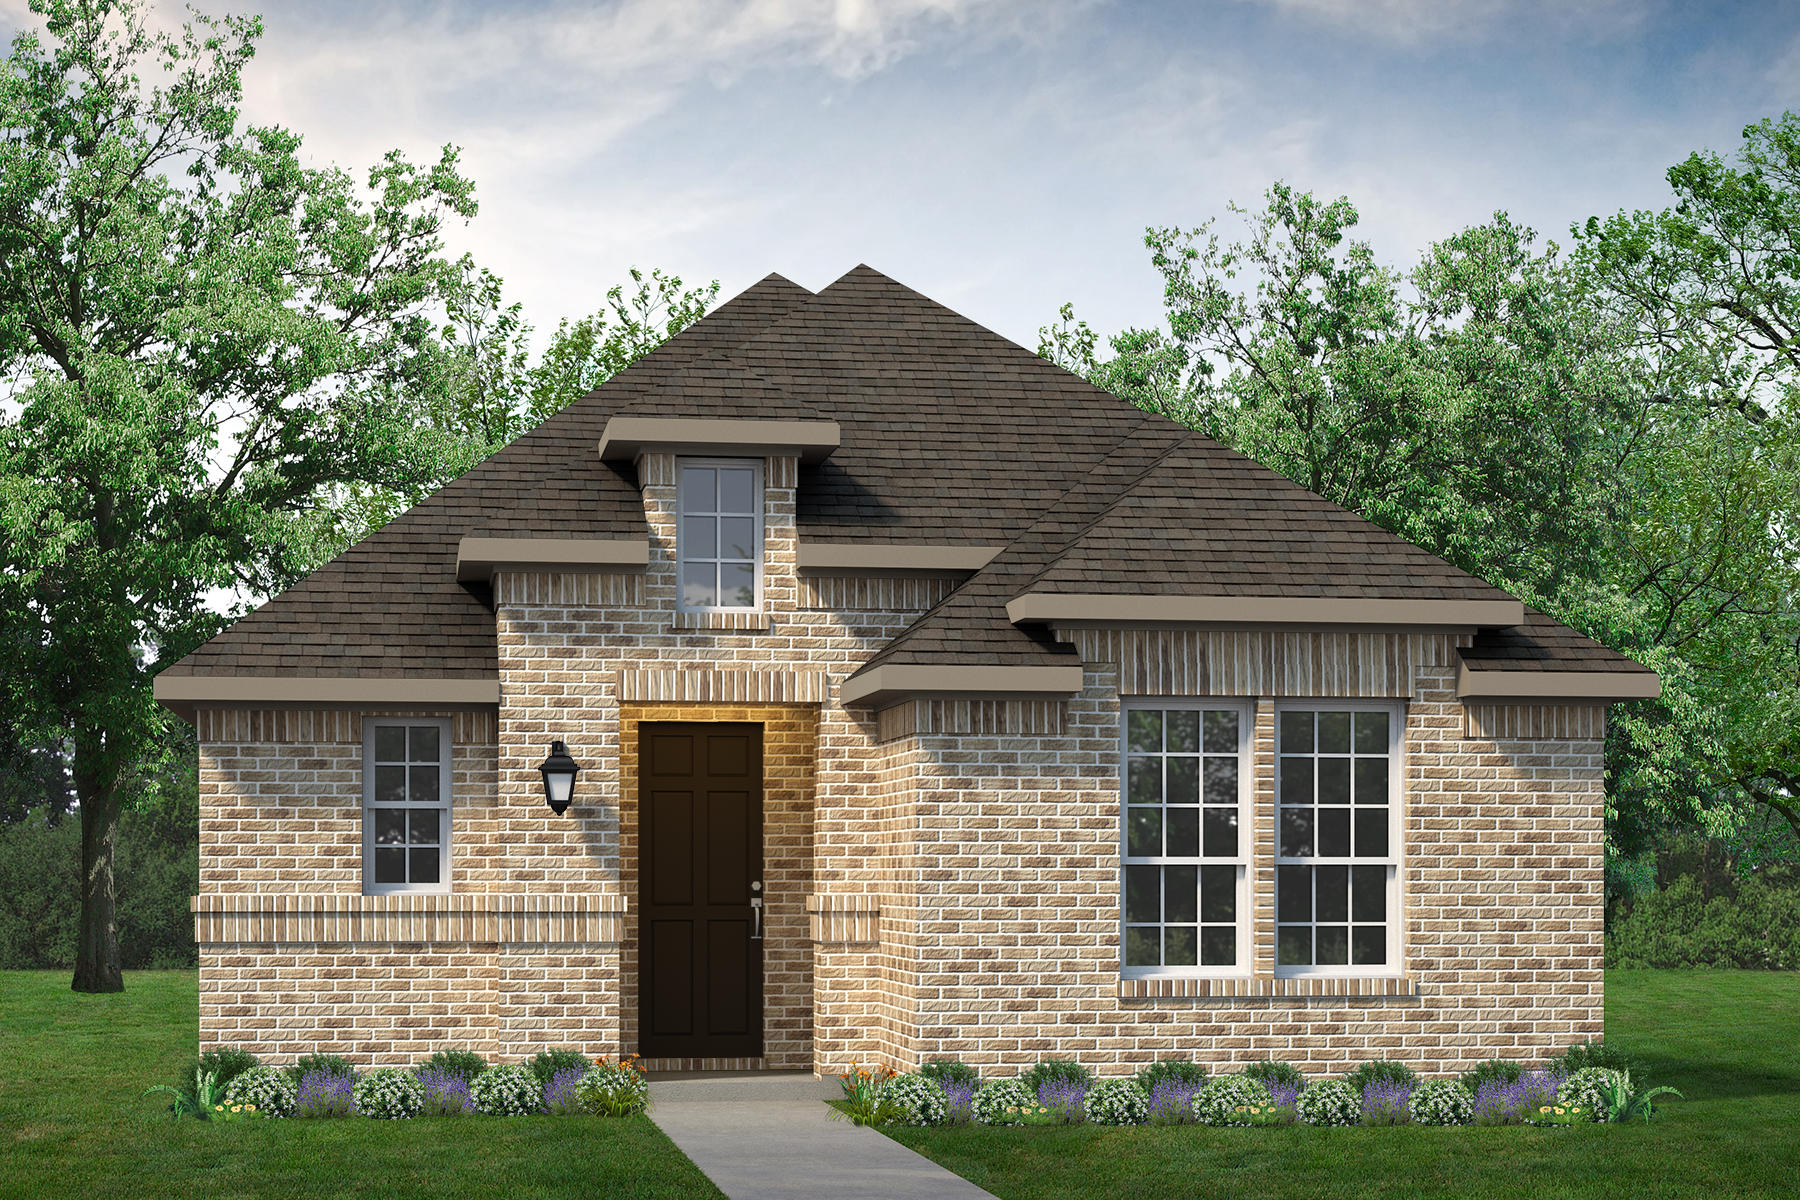 A rendering of a two-story brick home featuring the Belton floor plan.